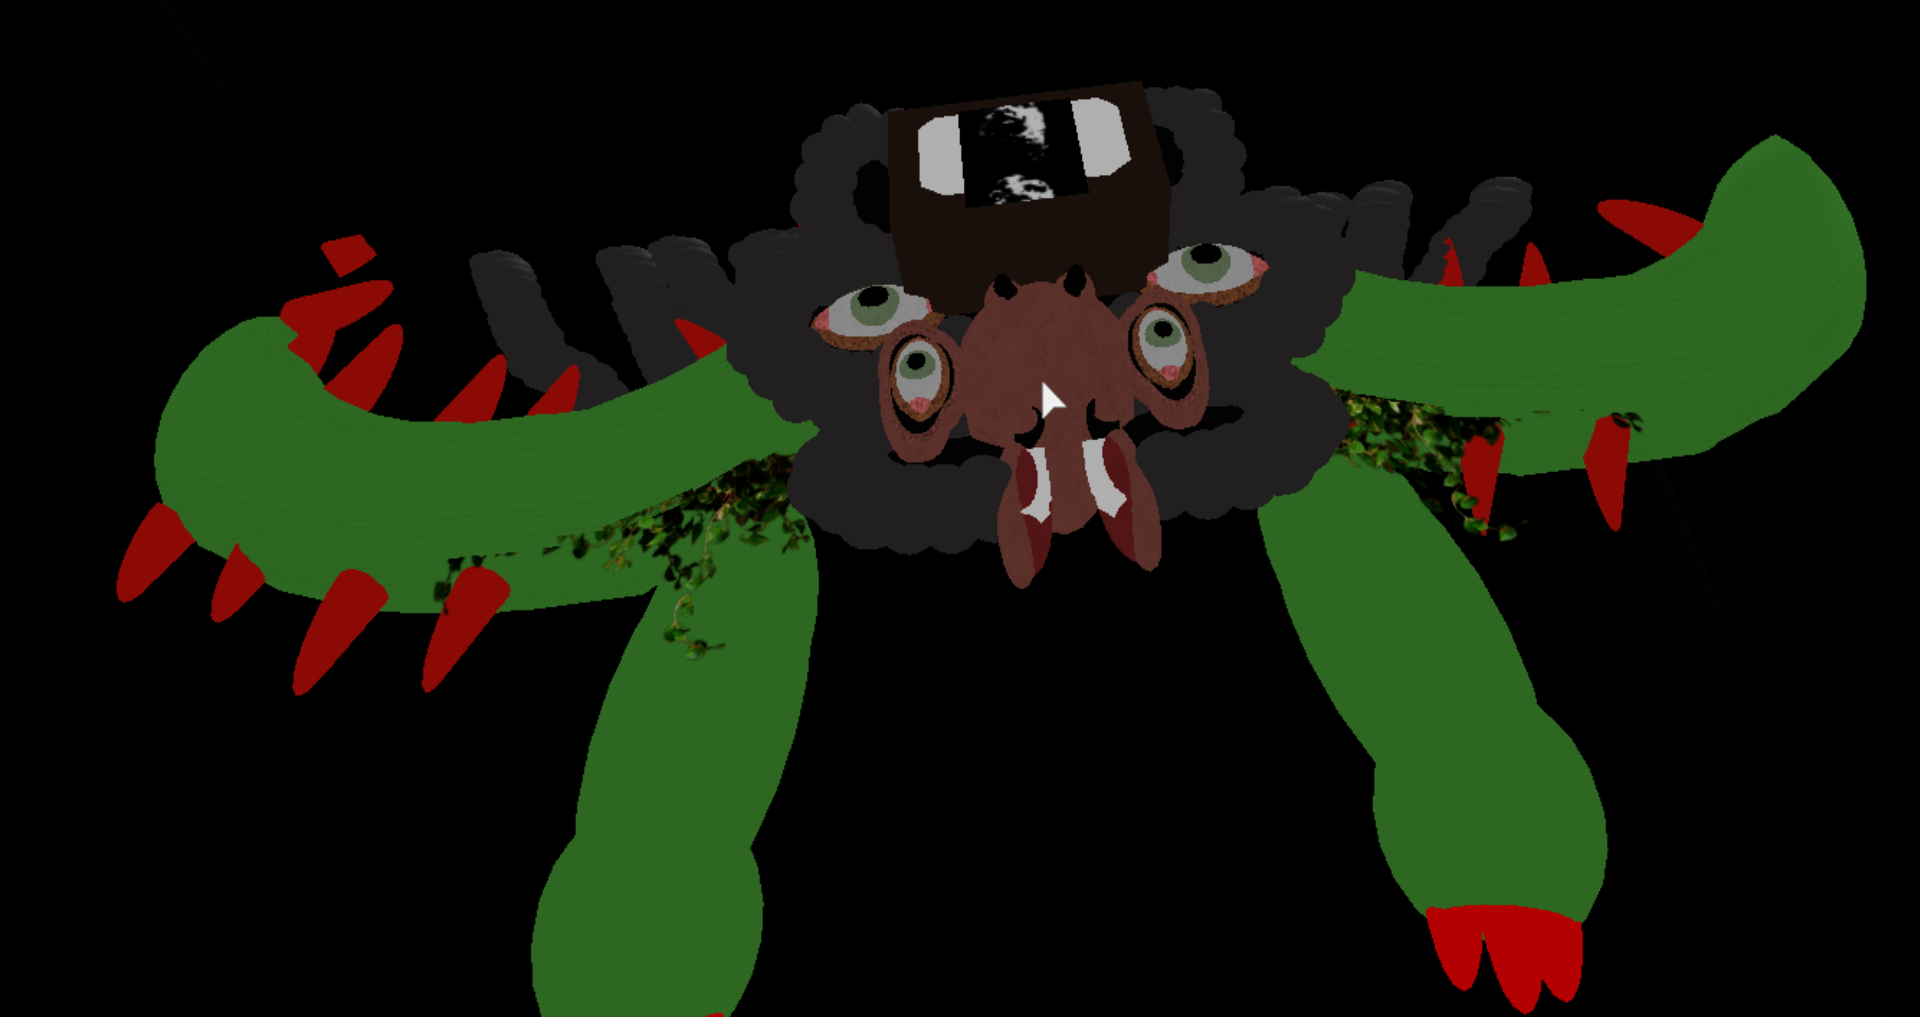 The Mobile Omega Flowey Battle Simulator (yes this is an actual thing) 